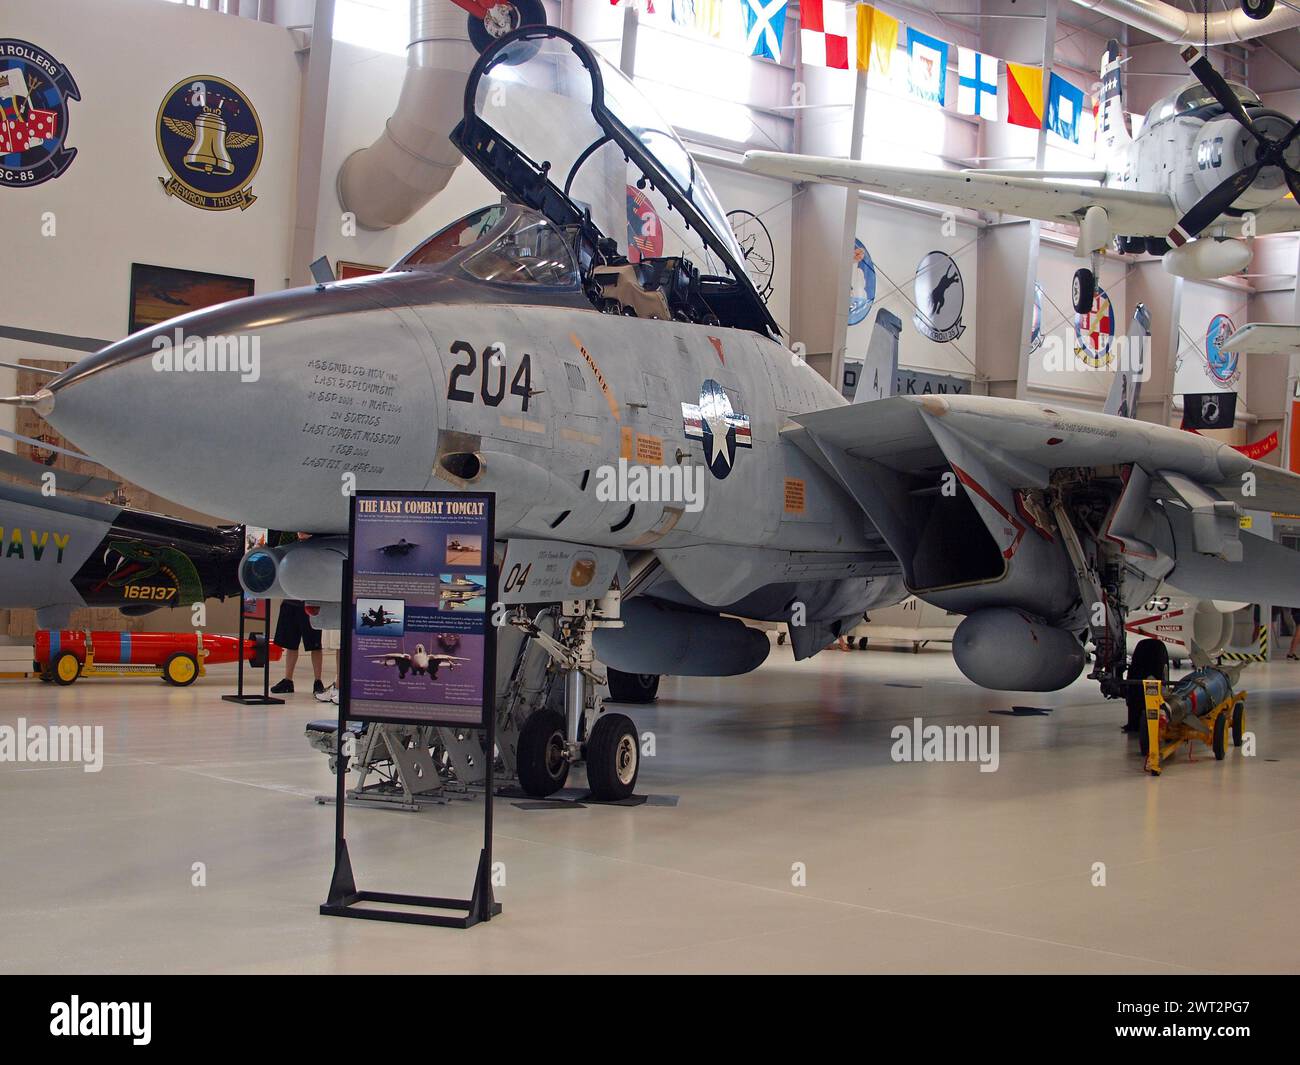 Pensacola, Florida, United States - August 10, 2012: The last F-14 Tomcat that saw combat in the National Naval Aviation Museum. Stock Photo